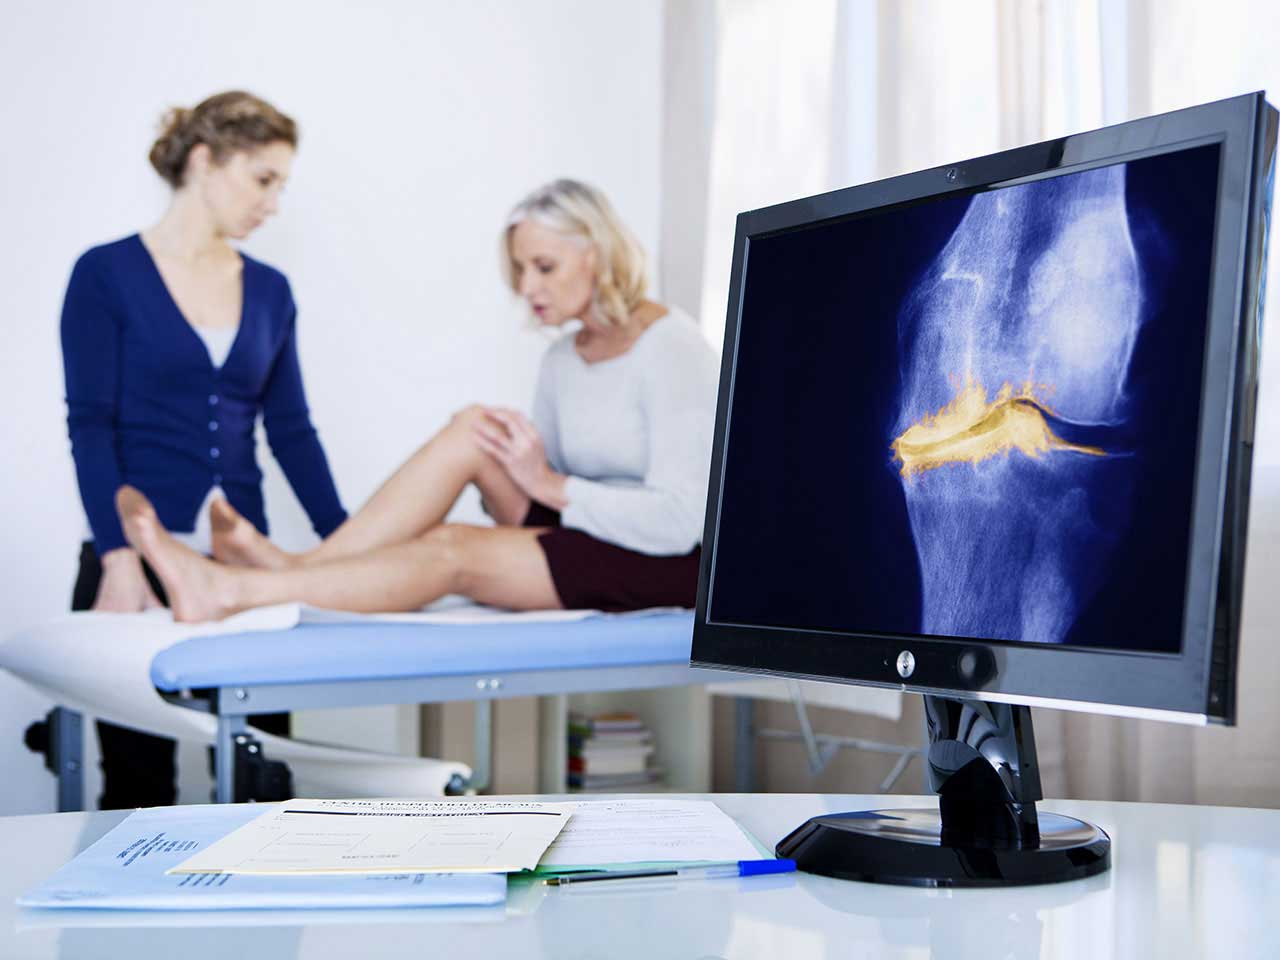 Consultant looking at patient's knee